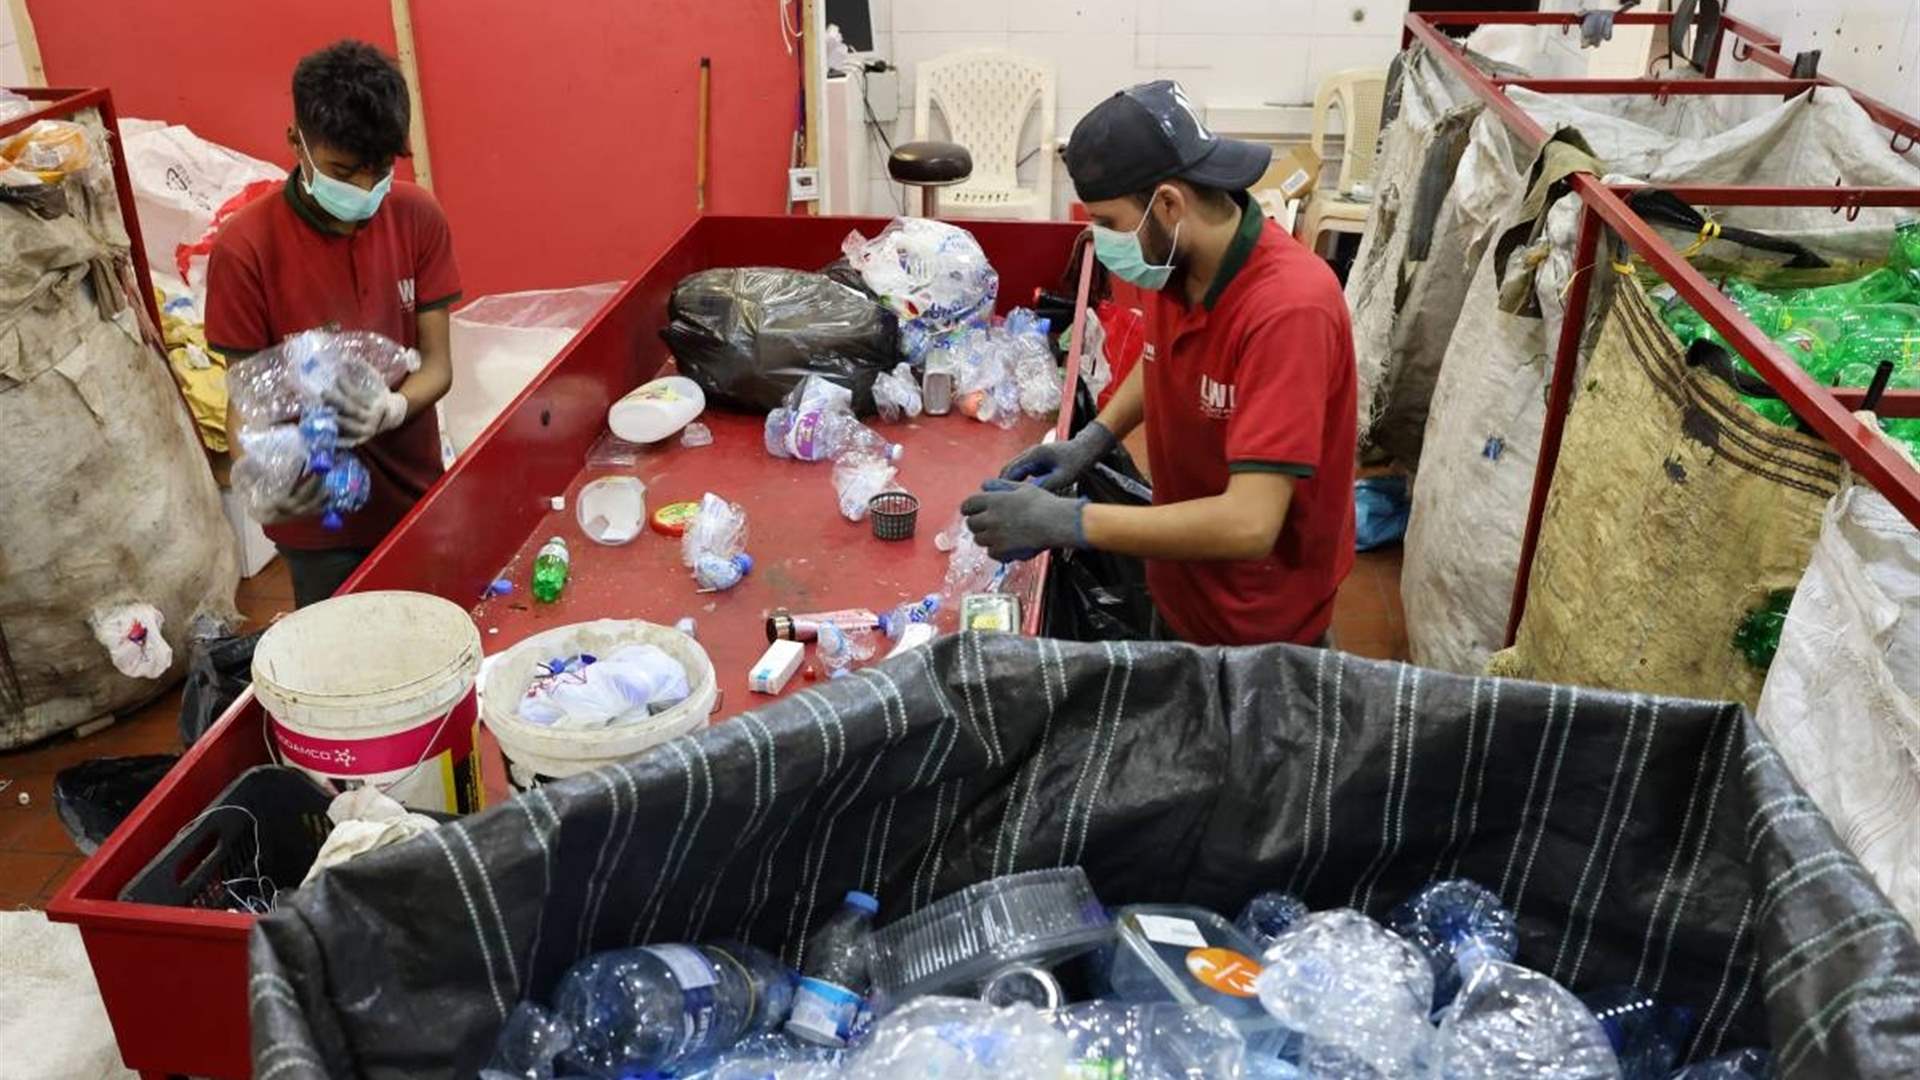 &#39;Drive-throw&#39; recycling aims to ease Lebanon garbage crisis